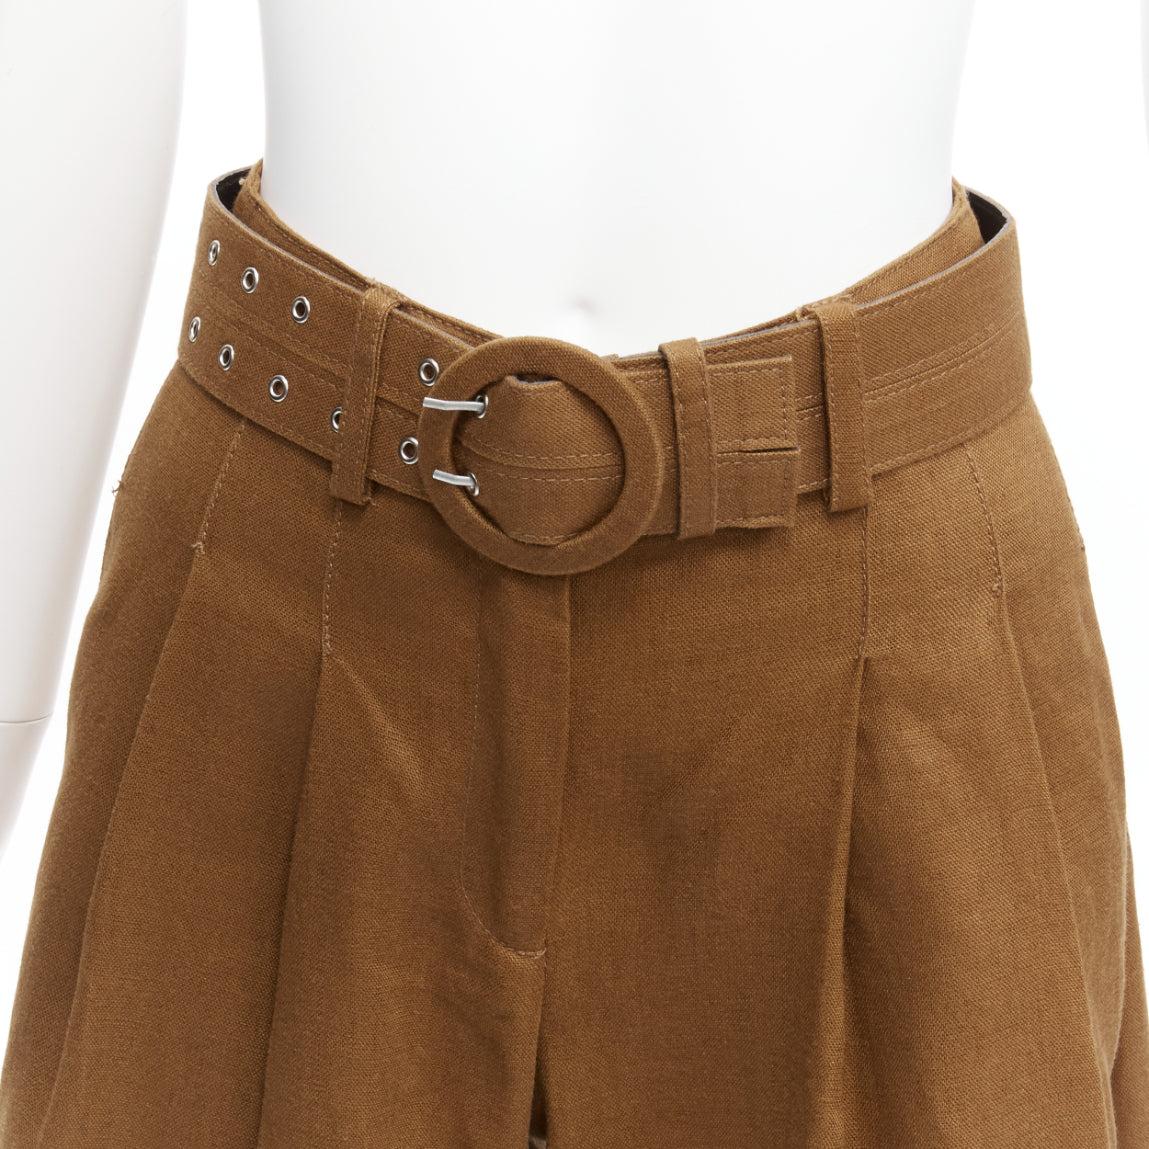 NICHOLAS brown 100% linen high waisted belt wide leg pants US6 M
Reference: SNKO/A00331
Brand: Nicholas
Material: Linen
Color: Brown
Pattern: Solid
Closure: Belt
Lining: Brown Fabric
Extra Details: Back and front darts flatter bum.
Made in: